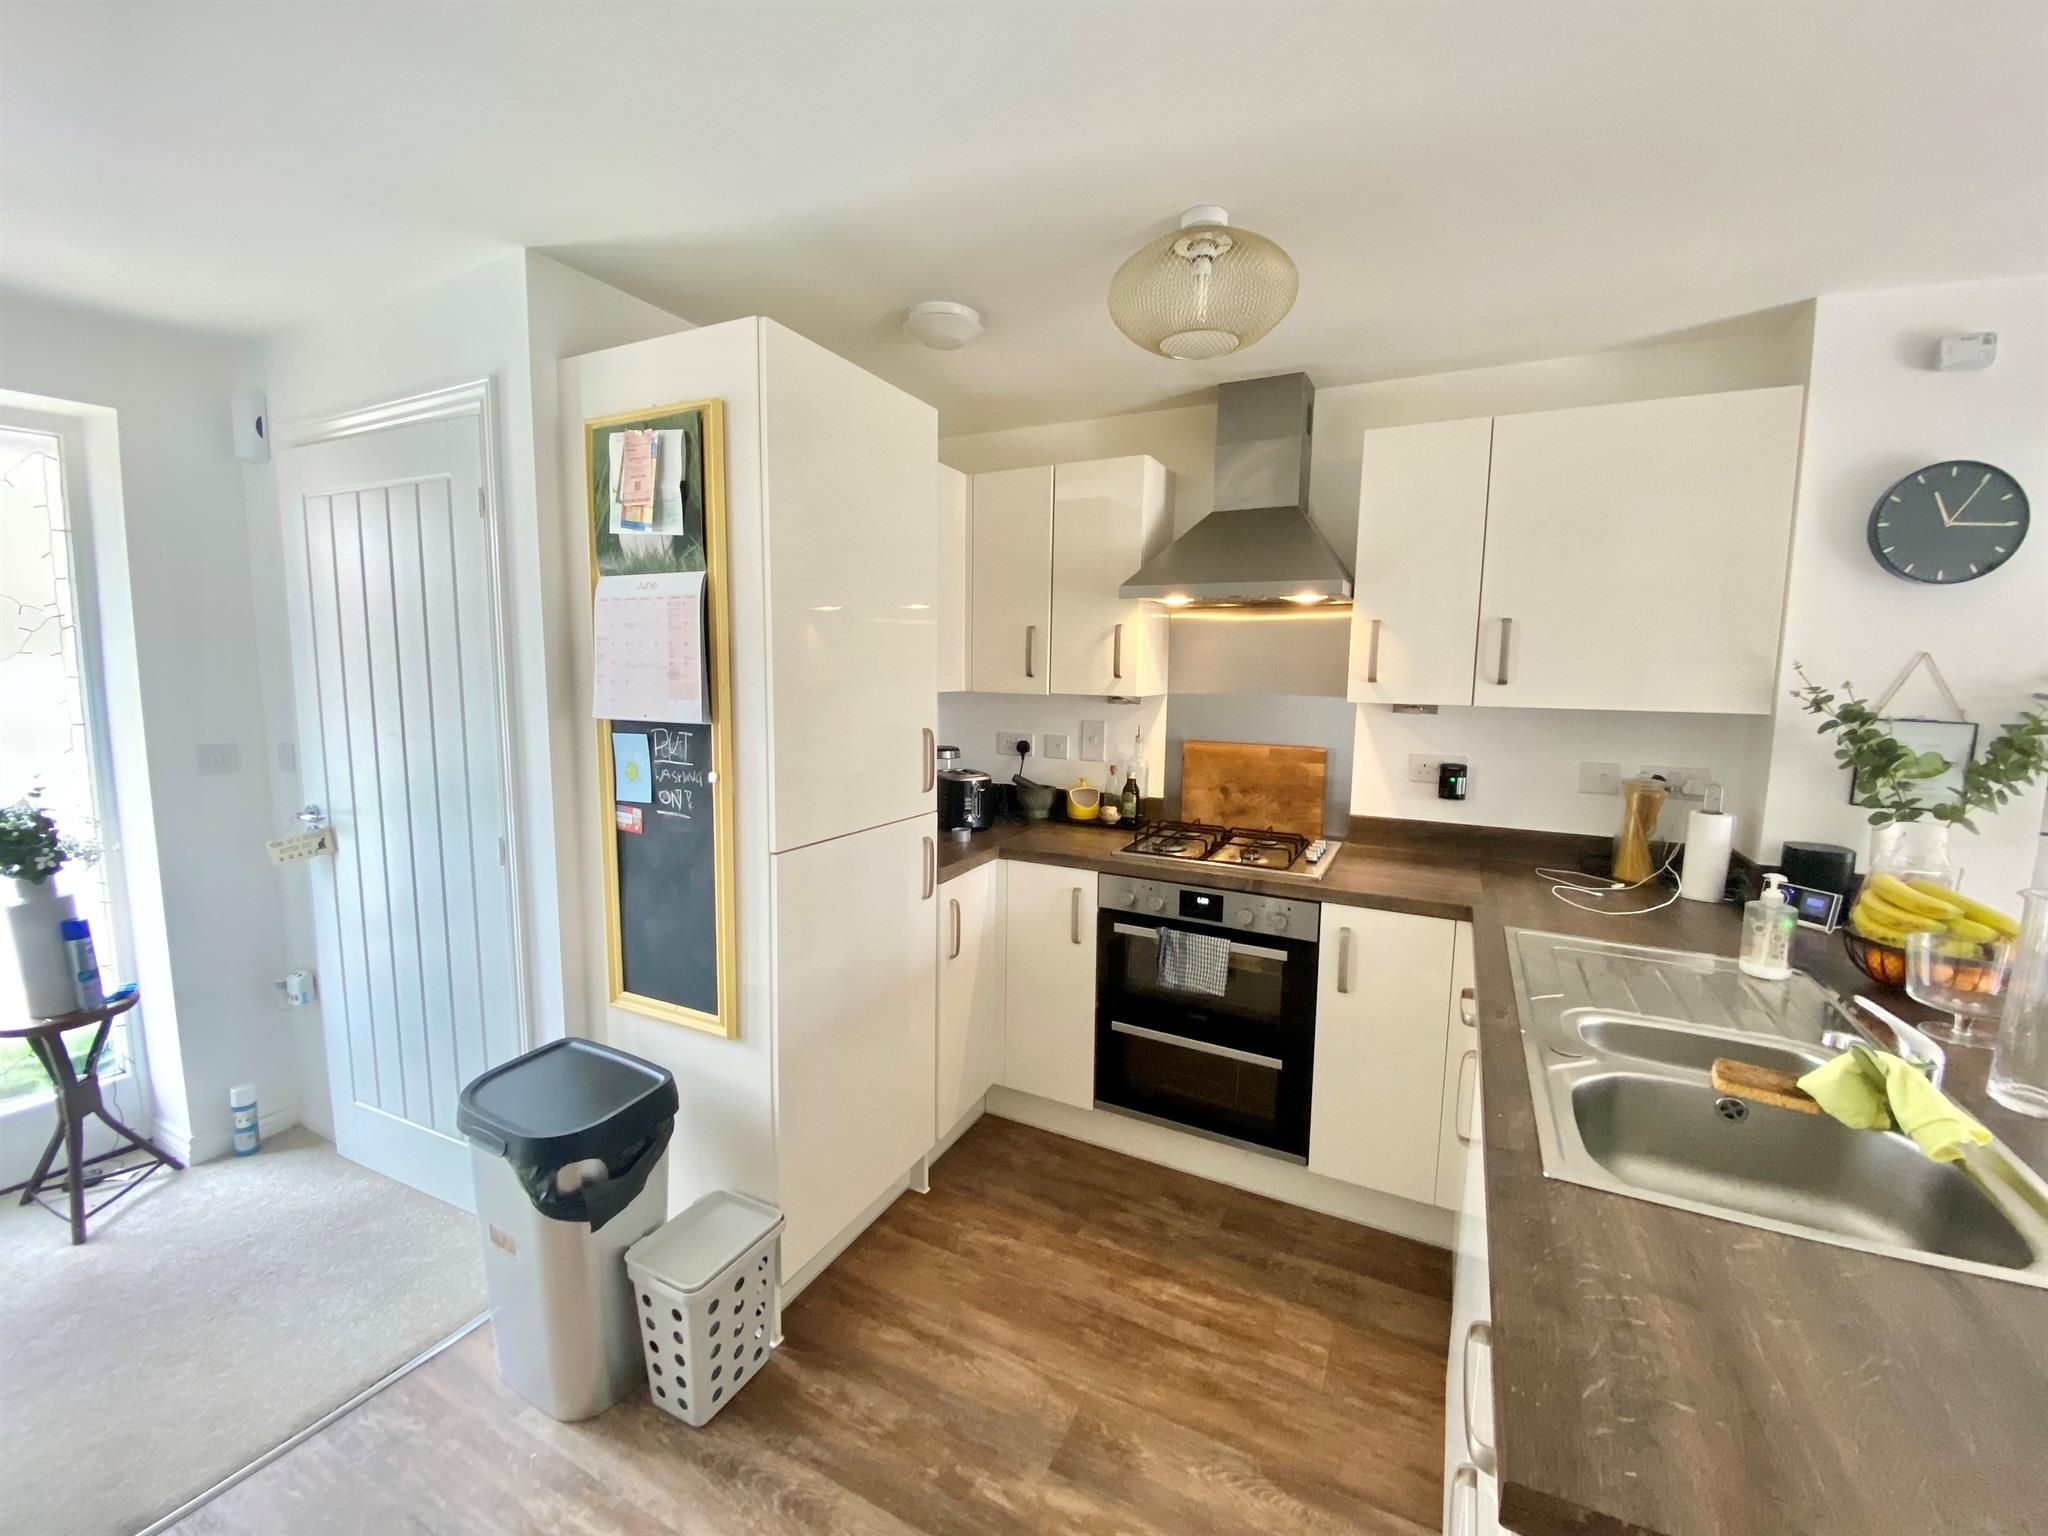 2 bed property to rent in Gladiator Road, Upper Cambourne, Cambridge ...